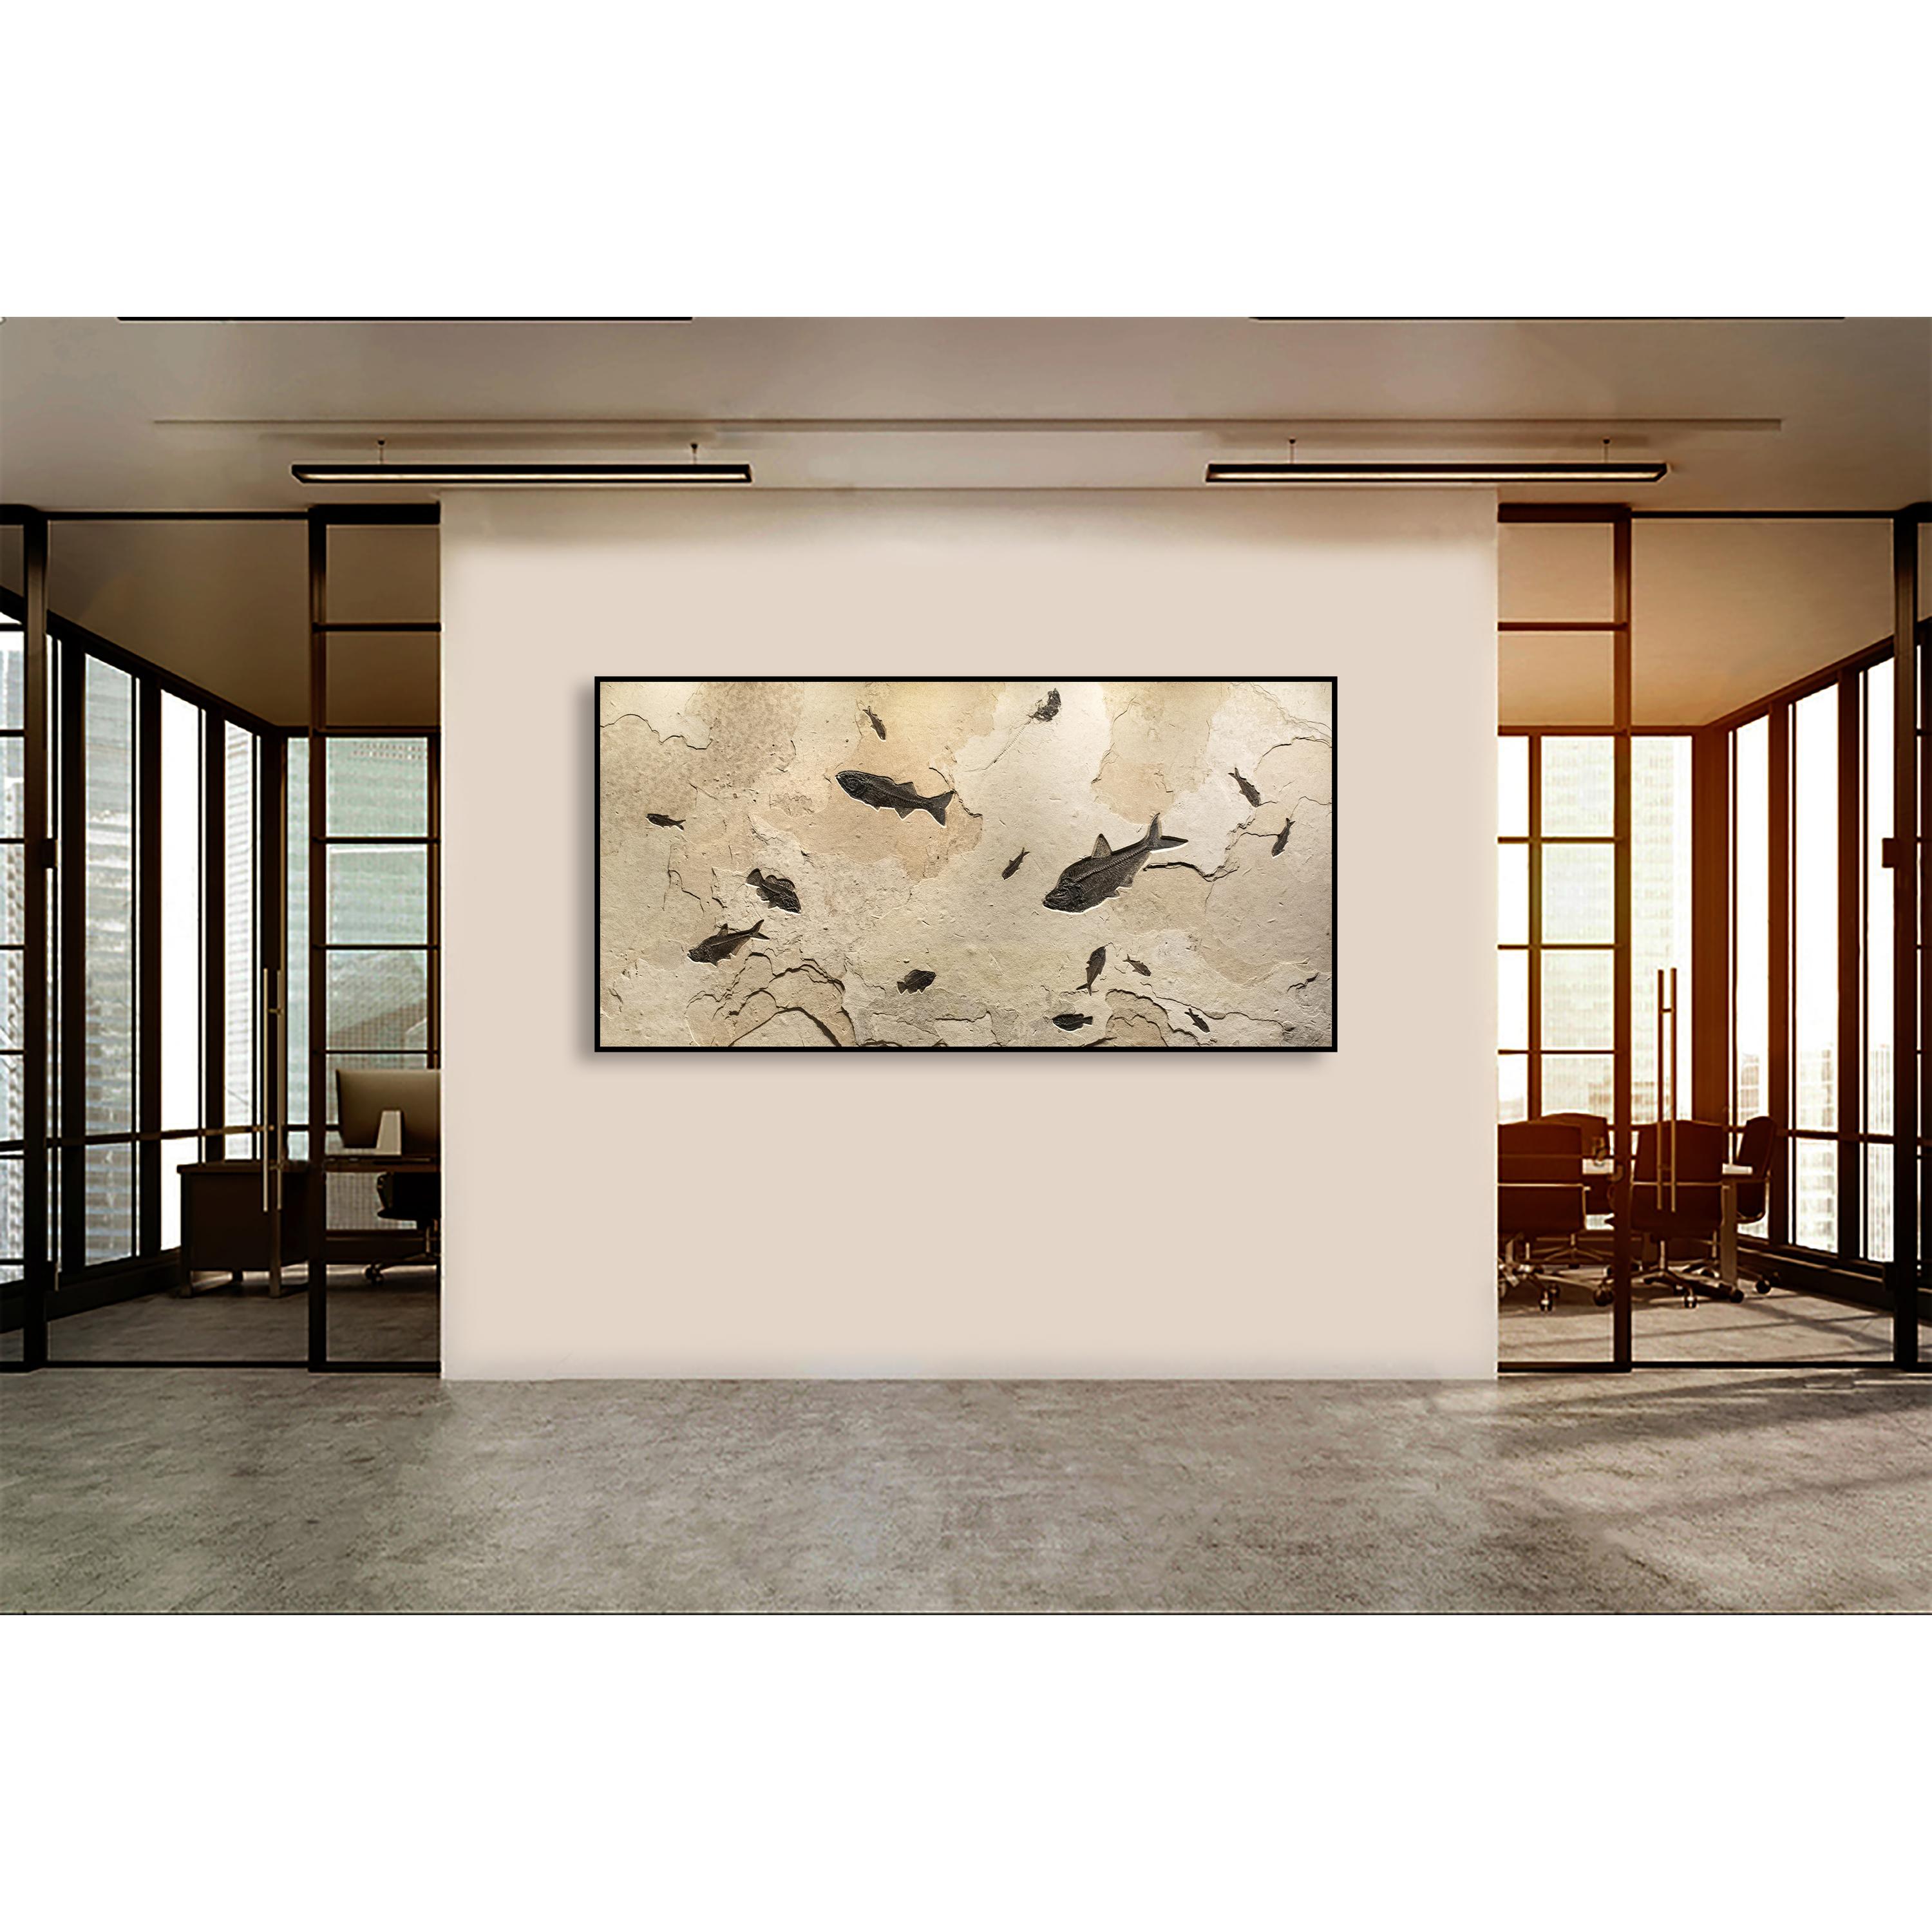 This exquisite and impressively sized fossil mural features a gorgeous collection of Eocene era fossil fish, all dating around 50 million years old. Four Diplomystus dentatus, a Mioplosus labracoides, six Knightia eocaena, and four Cockerellites